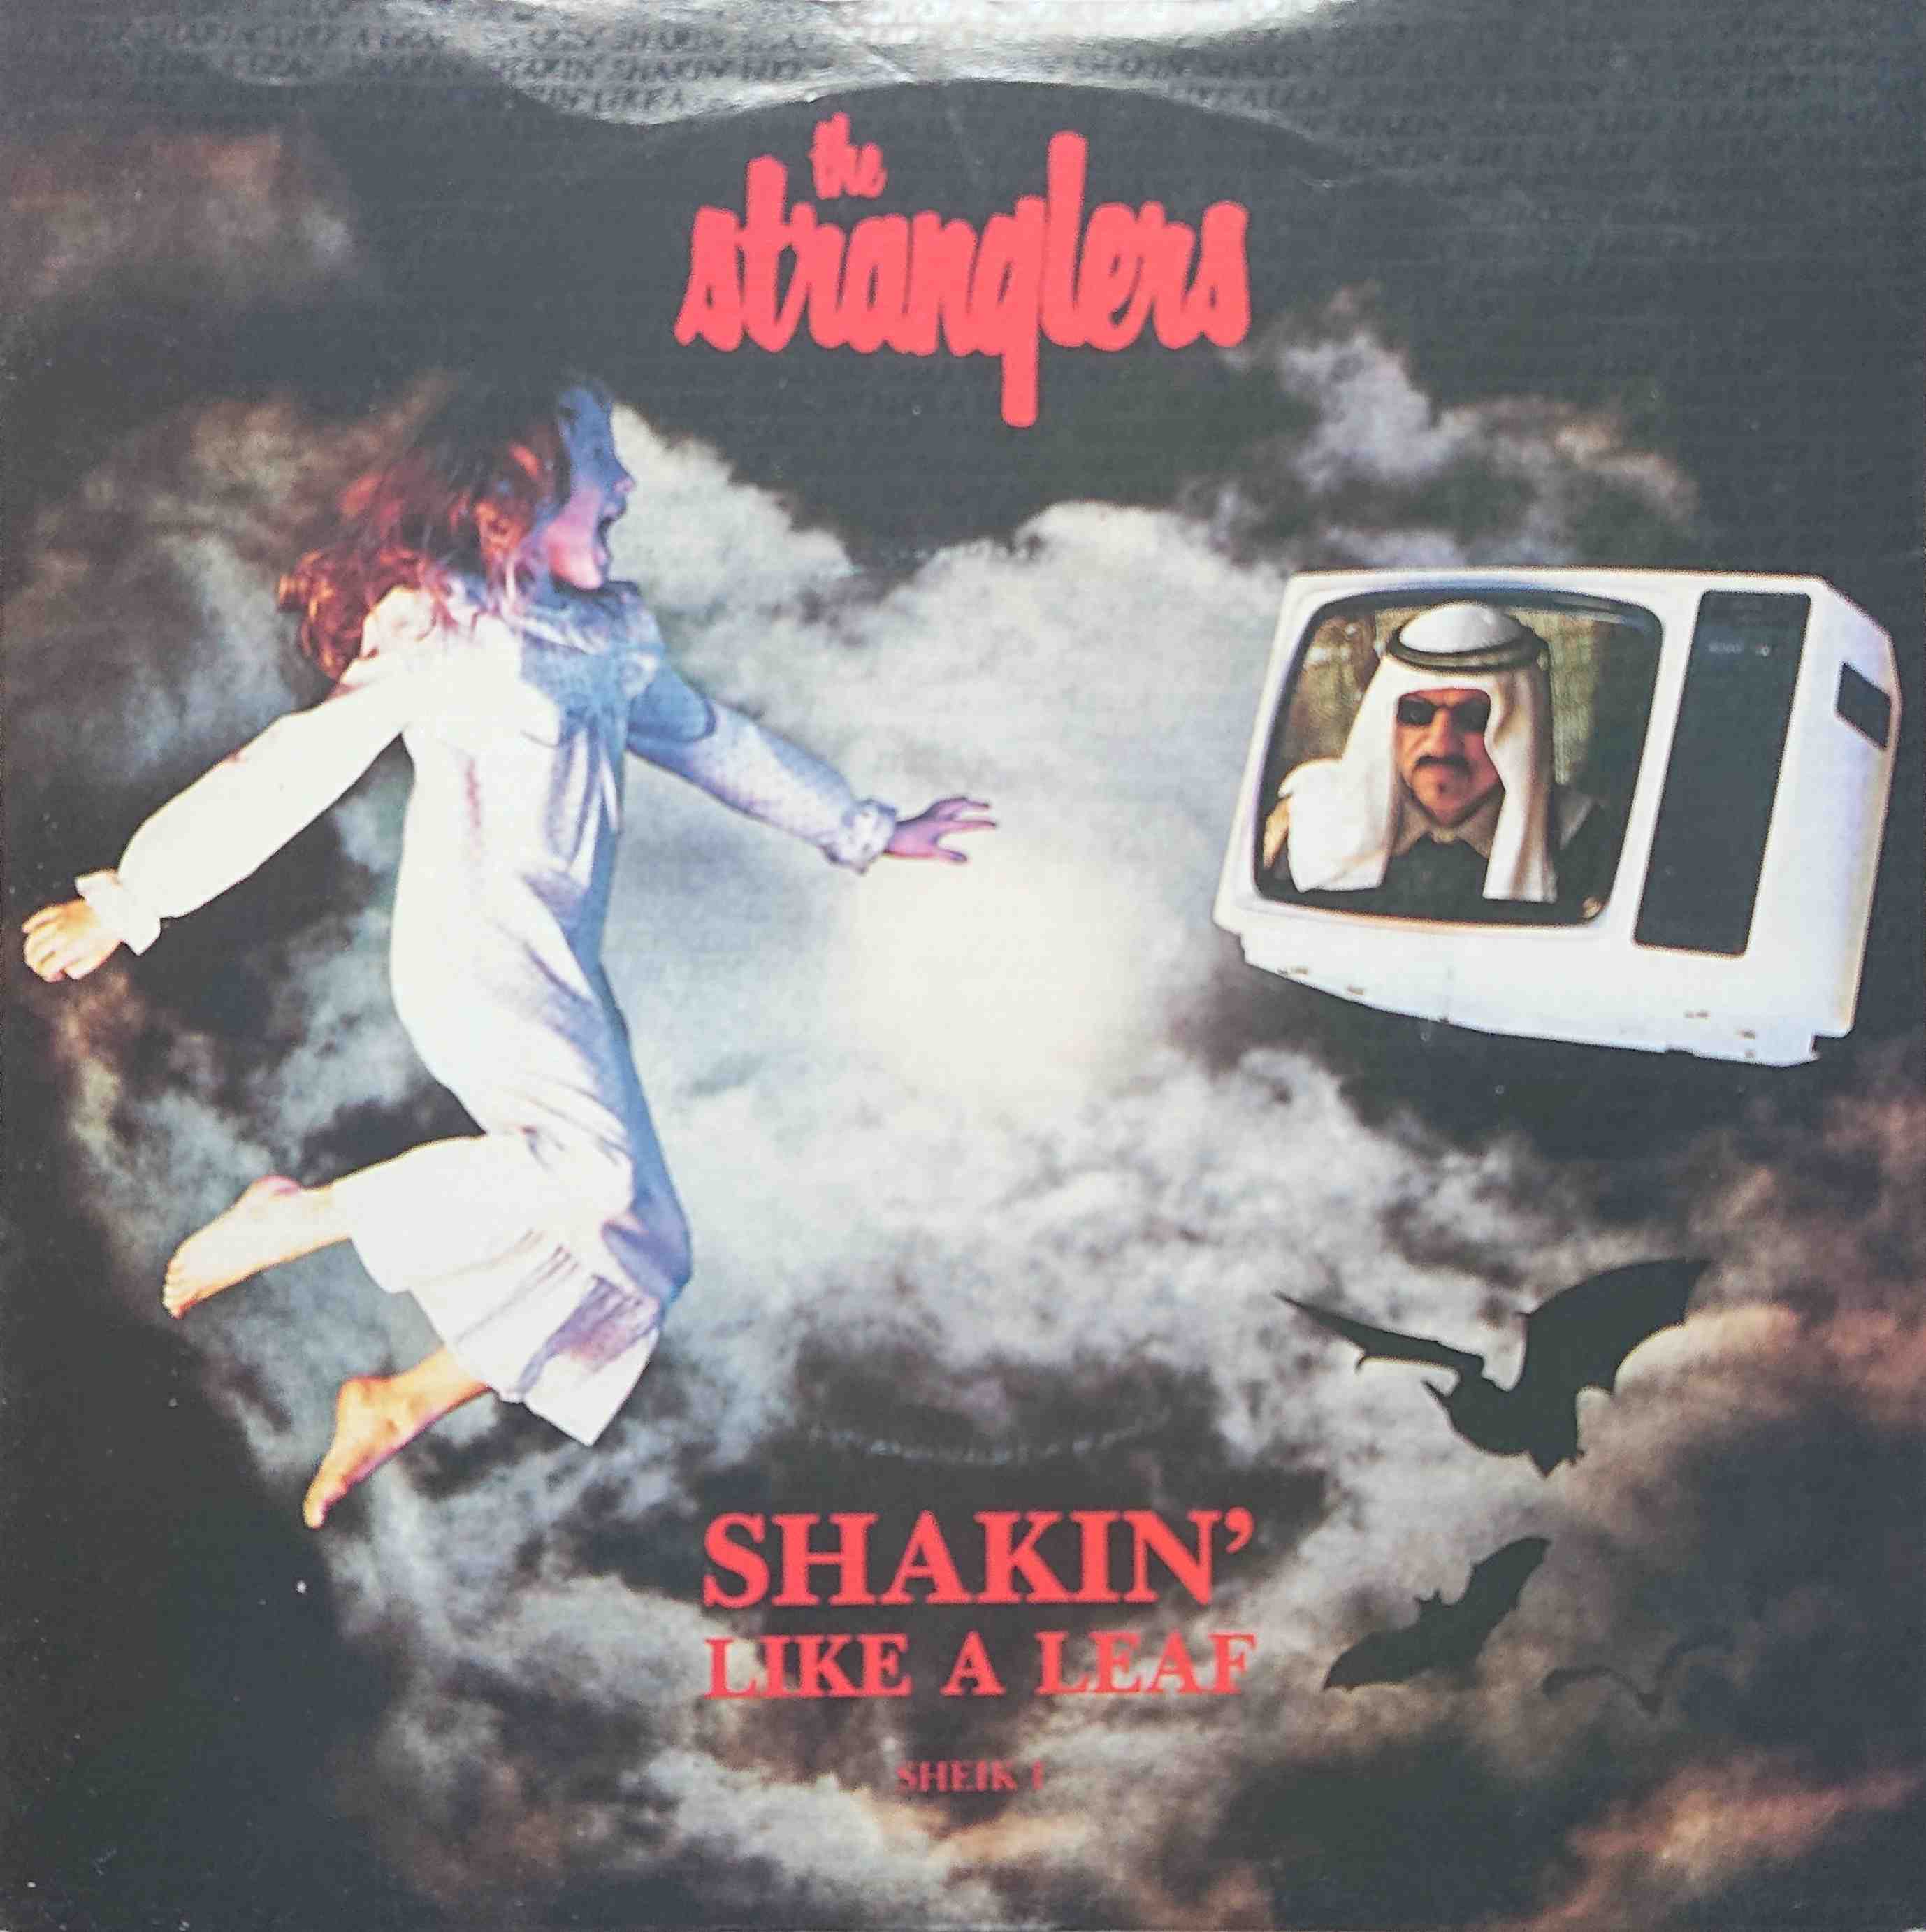 Picture of Shakin' like a leaf by artist The Stranglers from The Stranglers singles